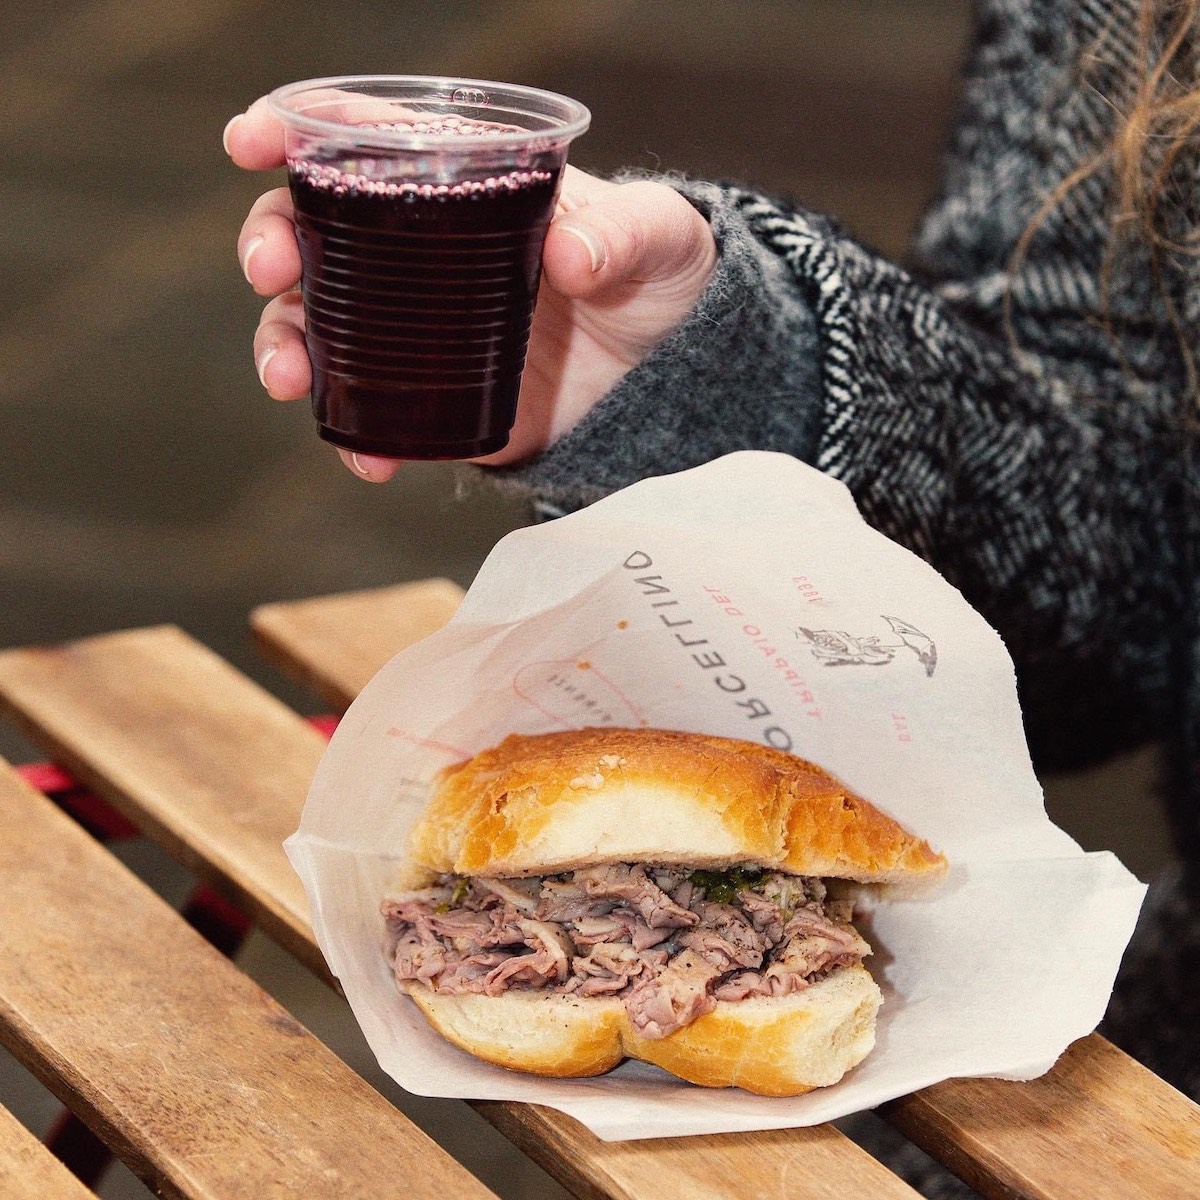 Lampredotto (tripe sandwich) in paper wrapping on a wooden table with a person's hand holding a plastic cup of red wine above